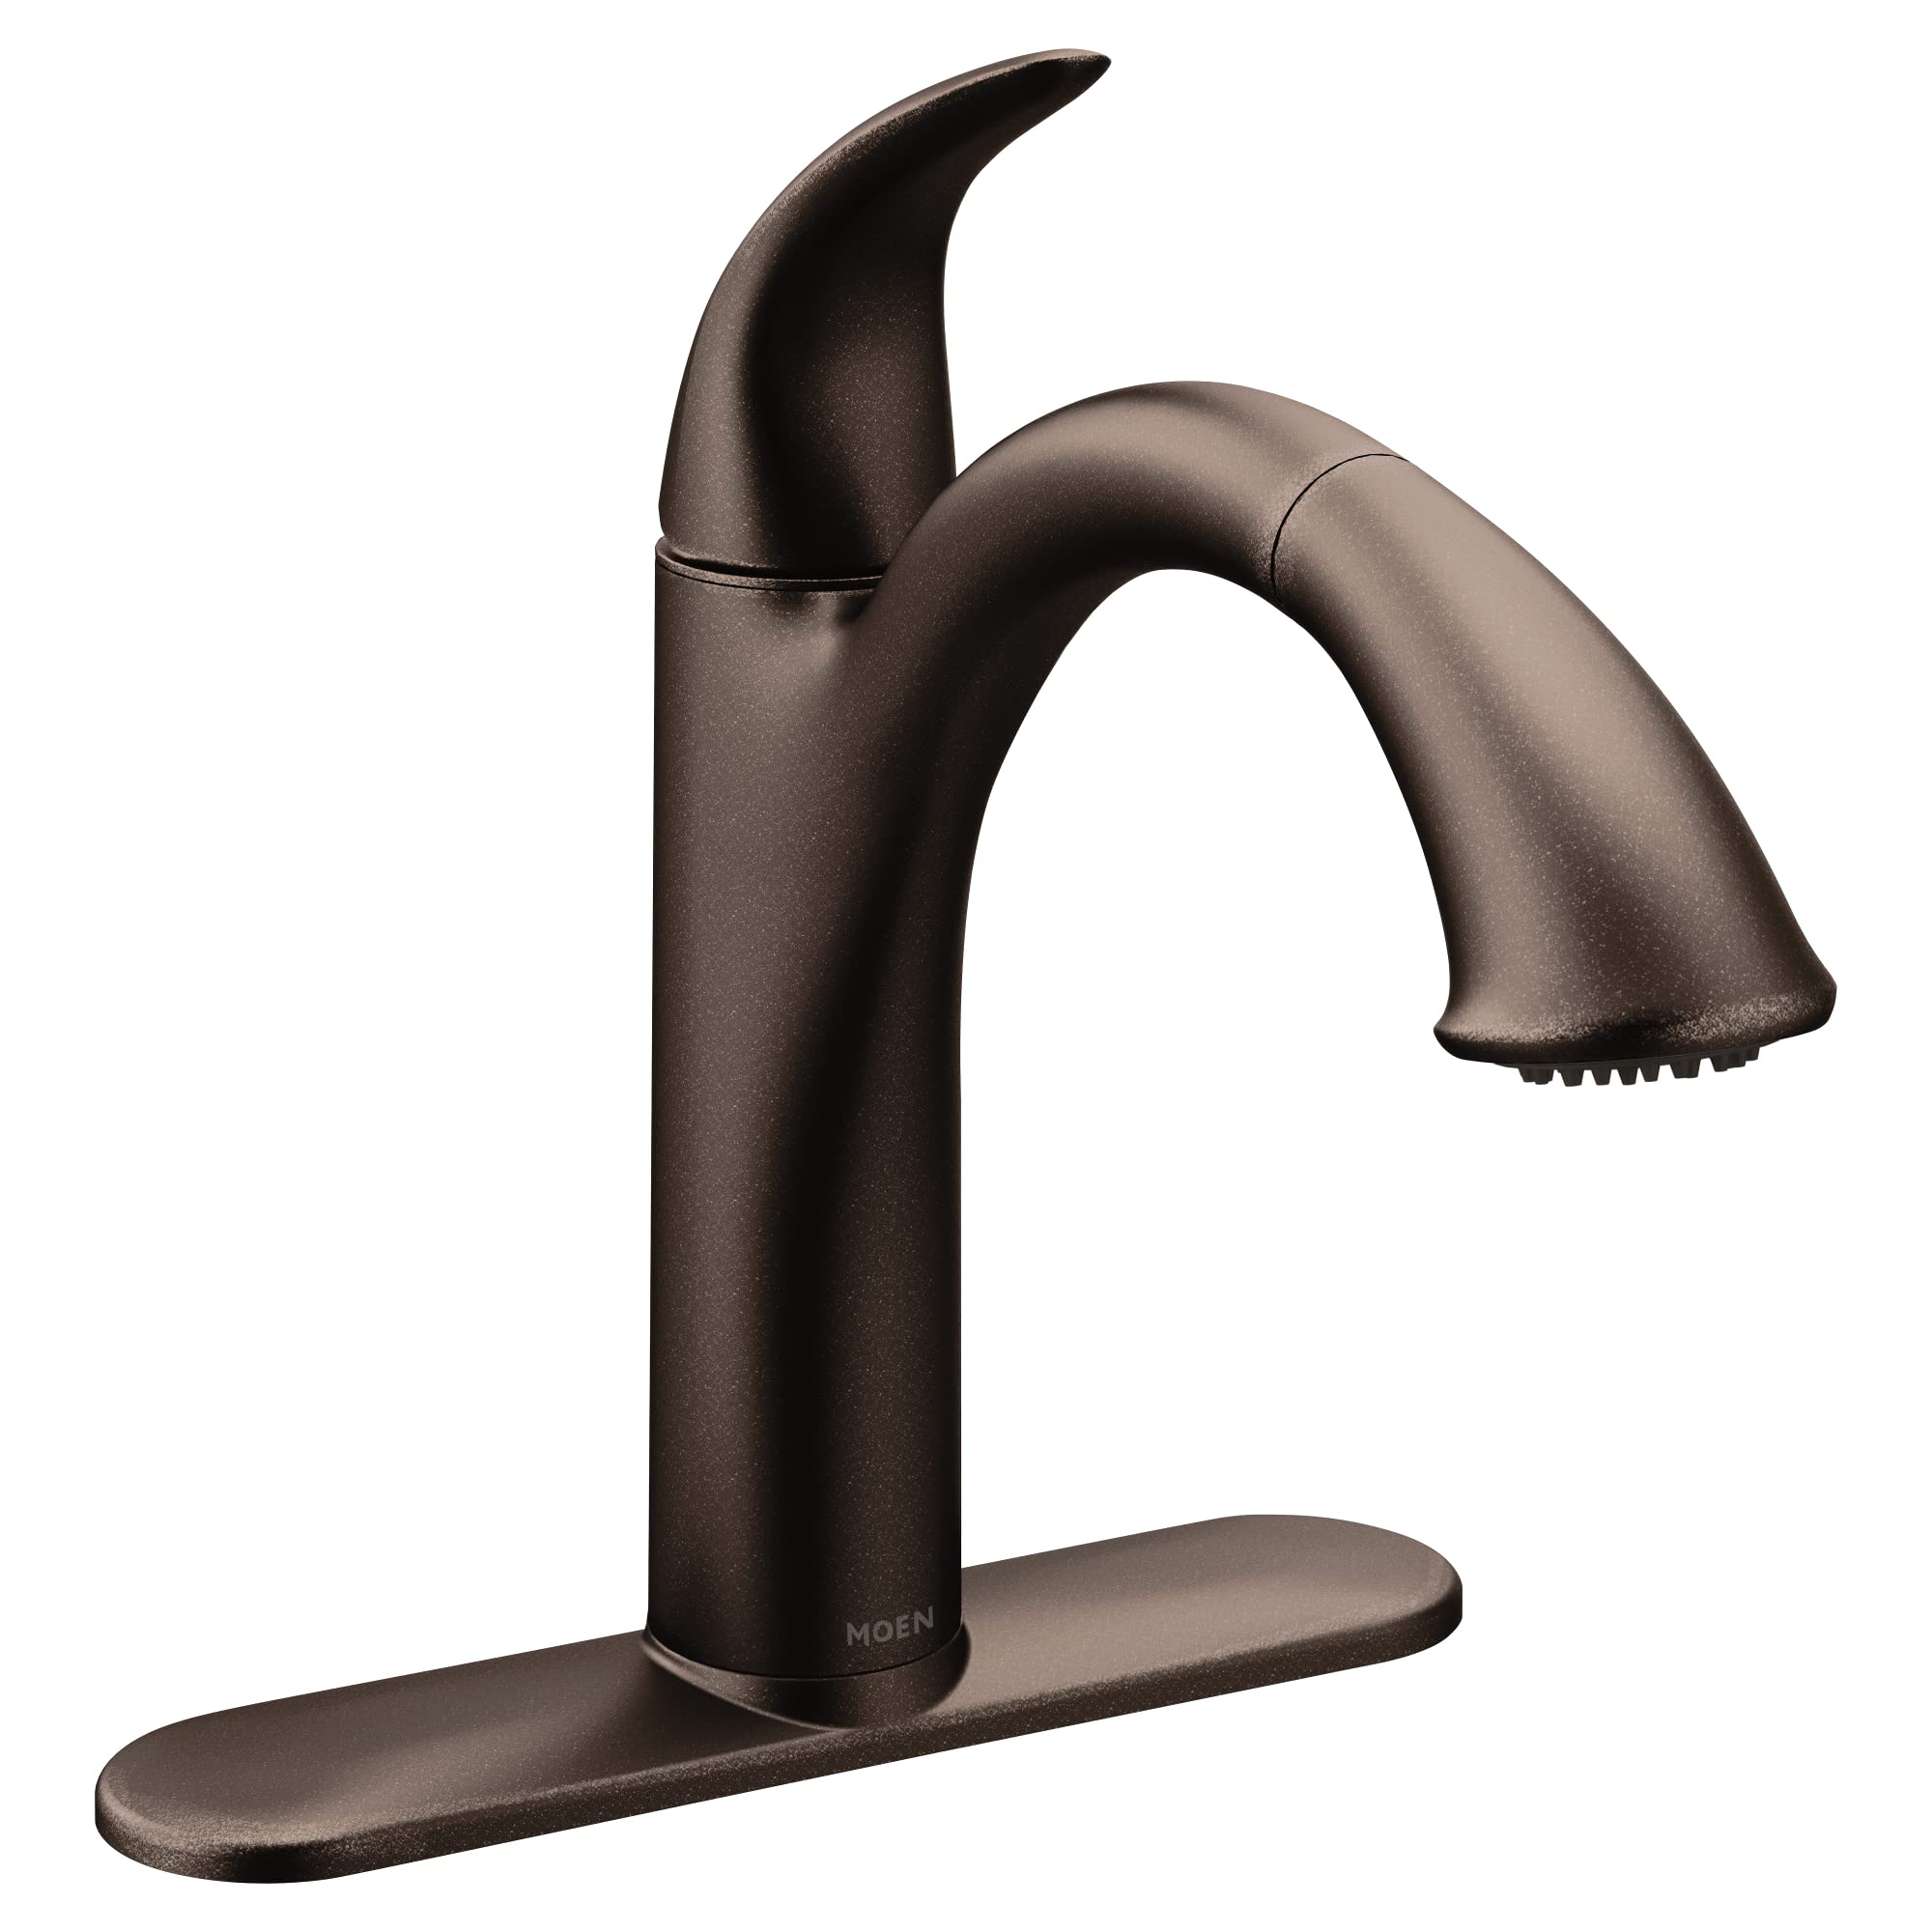 How to clean oil rubbed bronze faucets?